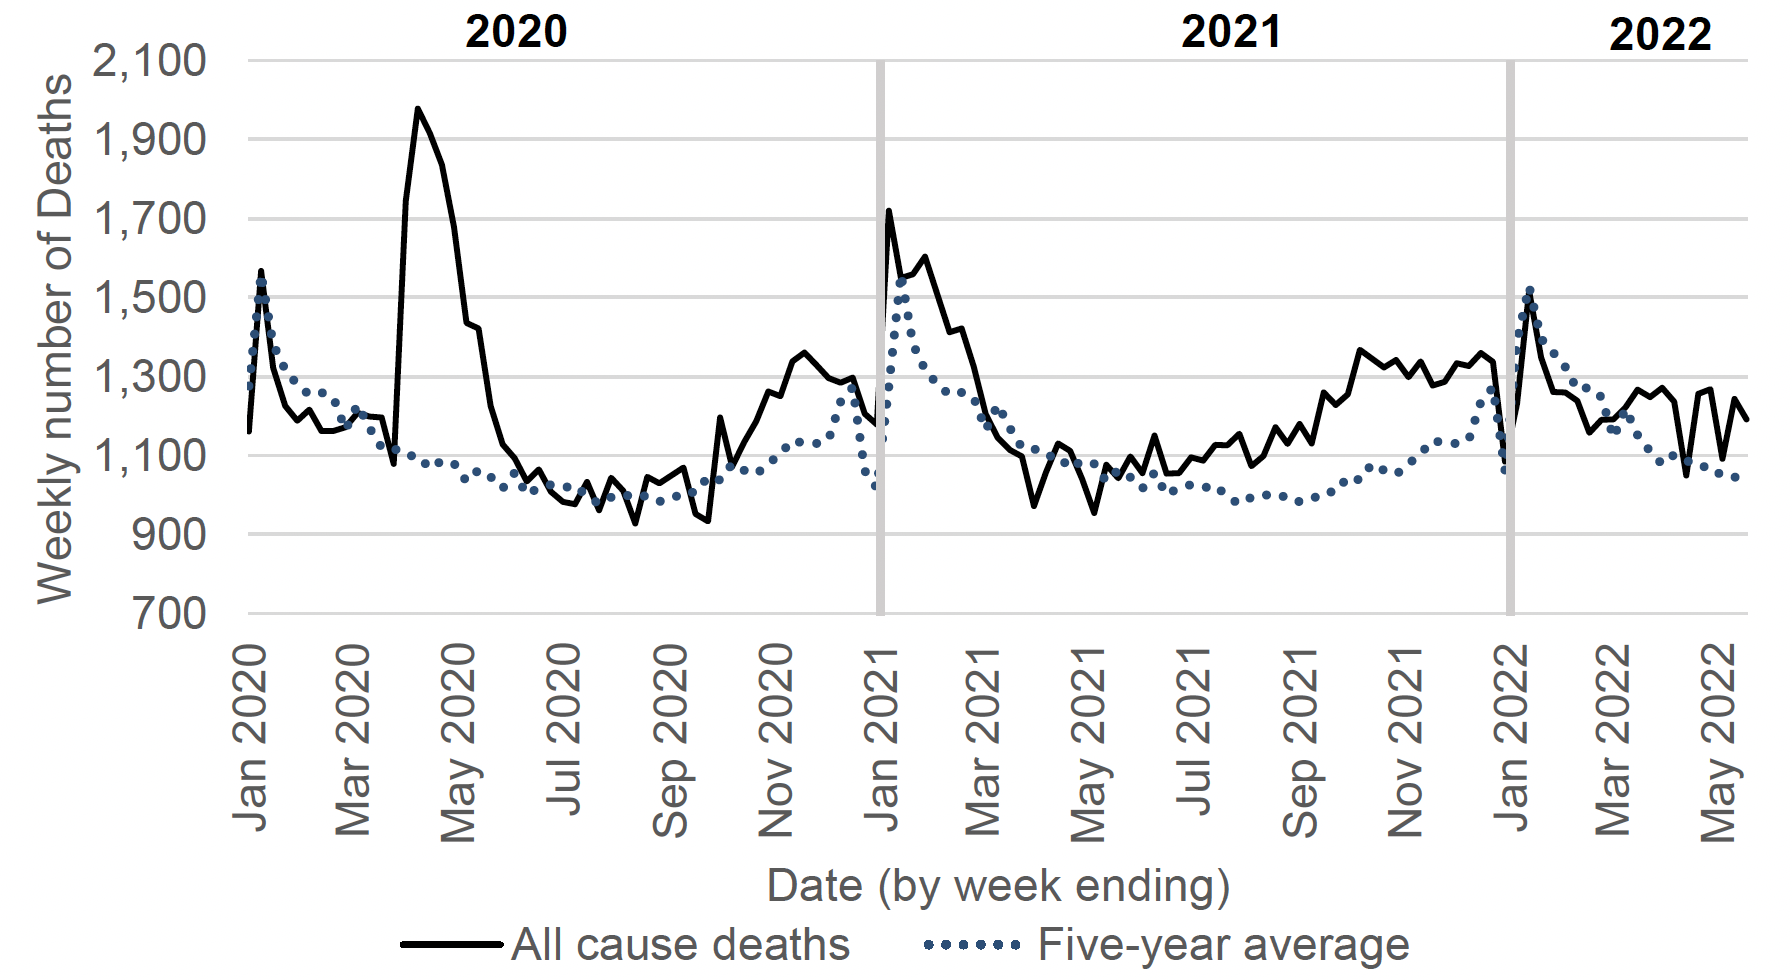 a line chart showing the total number of weekly deaths from all causes in Scotland from January 2020 to May 2022 with a solid line, and the five-year average weekly deaths for previous years with a dotted line. The total number of weekly deaths rose above the previous five-year average for the corresponding week and peaked in April 2020, November 2020, January 2021, mid-summer and autumn 2021, January 2022 and spring 2022. 